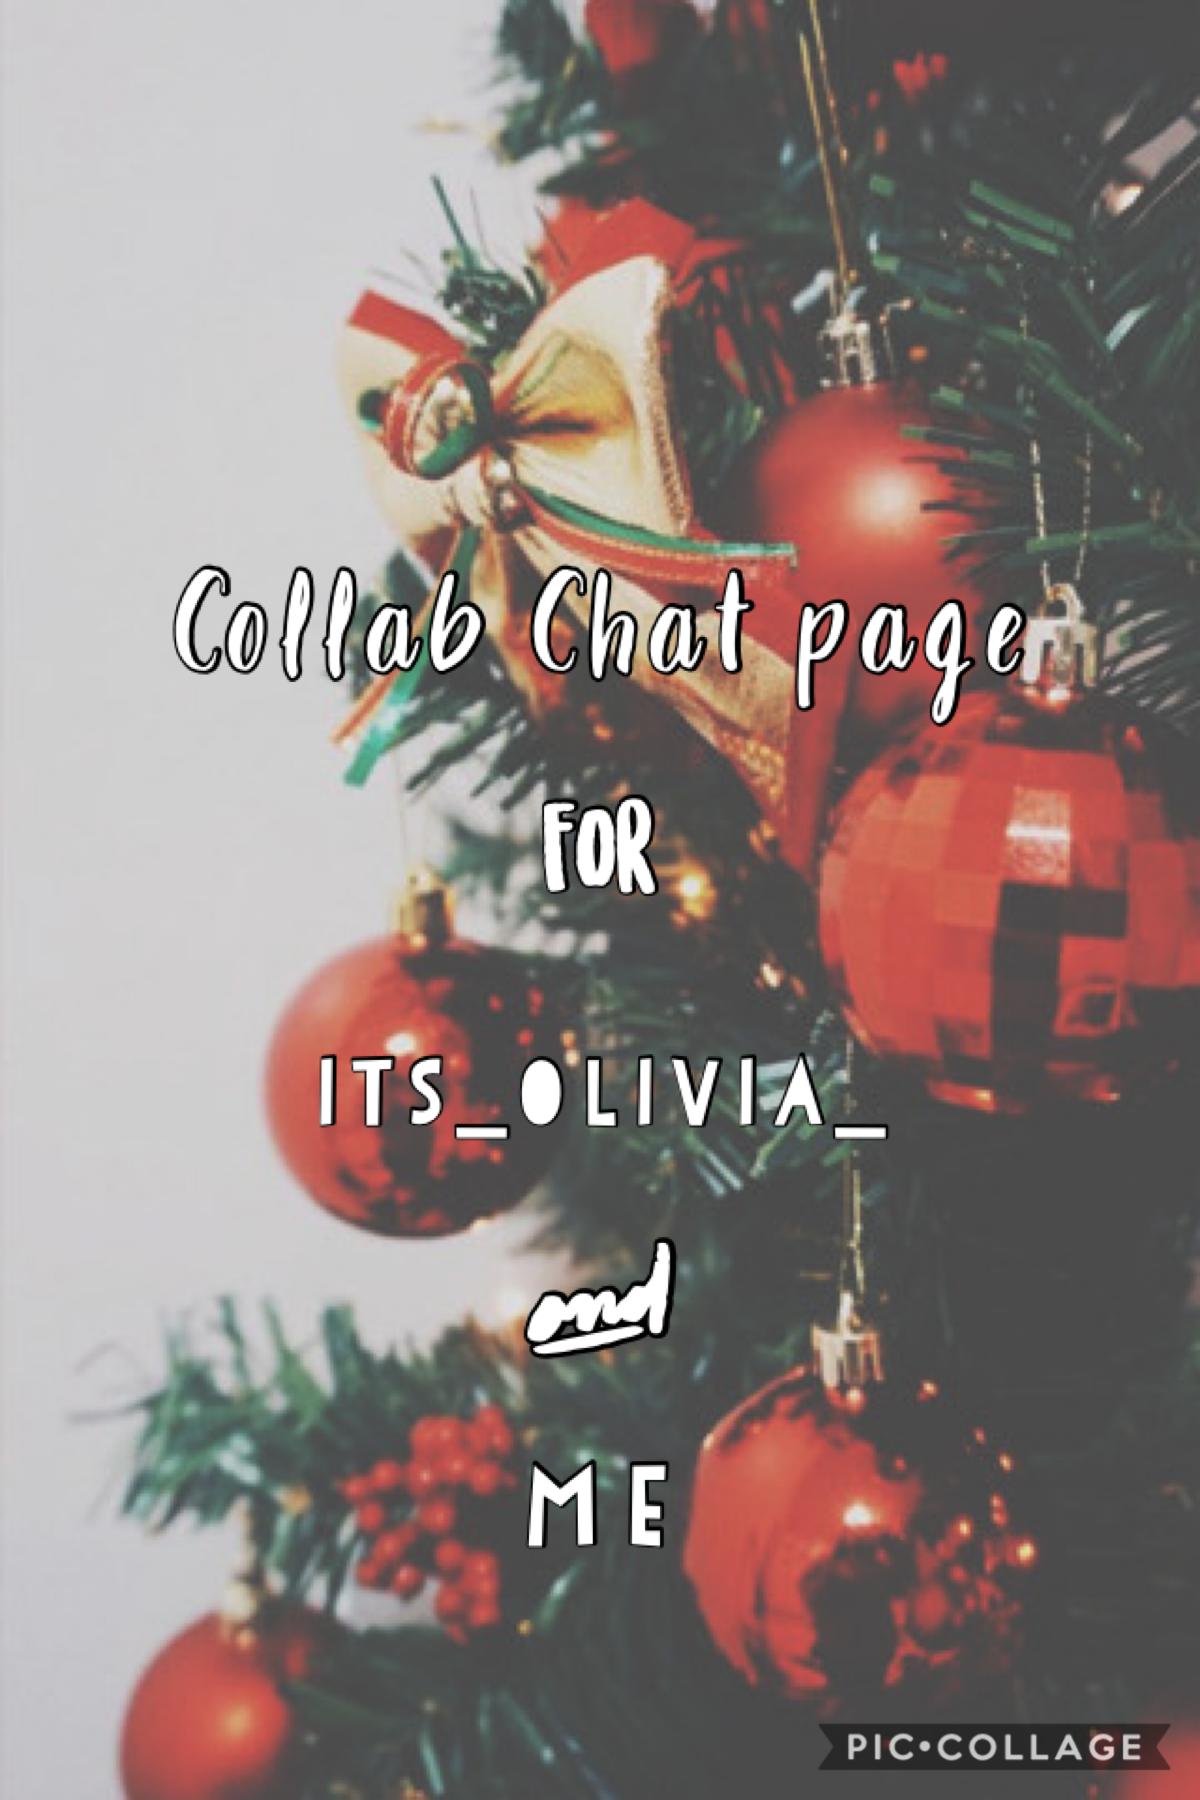 Collab chat page for me and its_olivia_ !! No peeking! 
Sorry for the inconvenience 😕😟